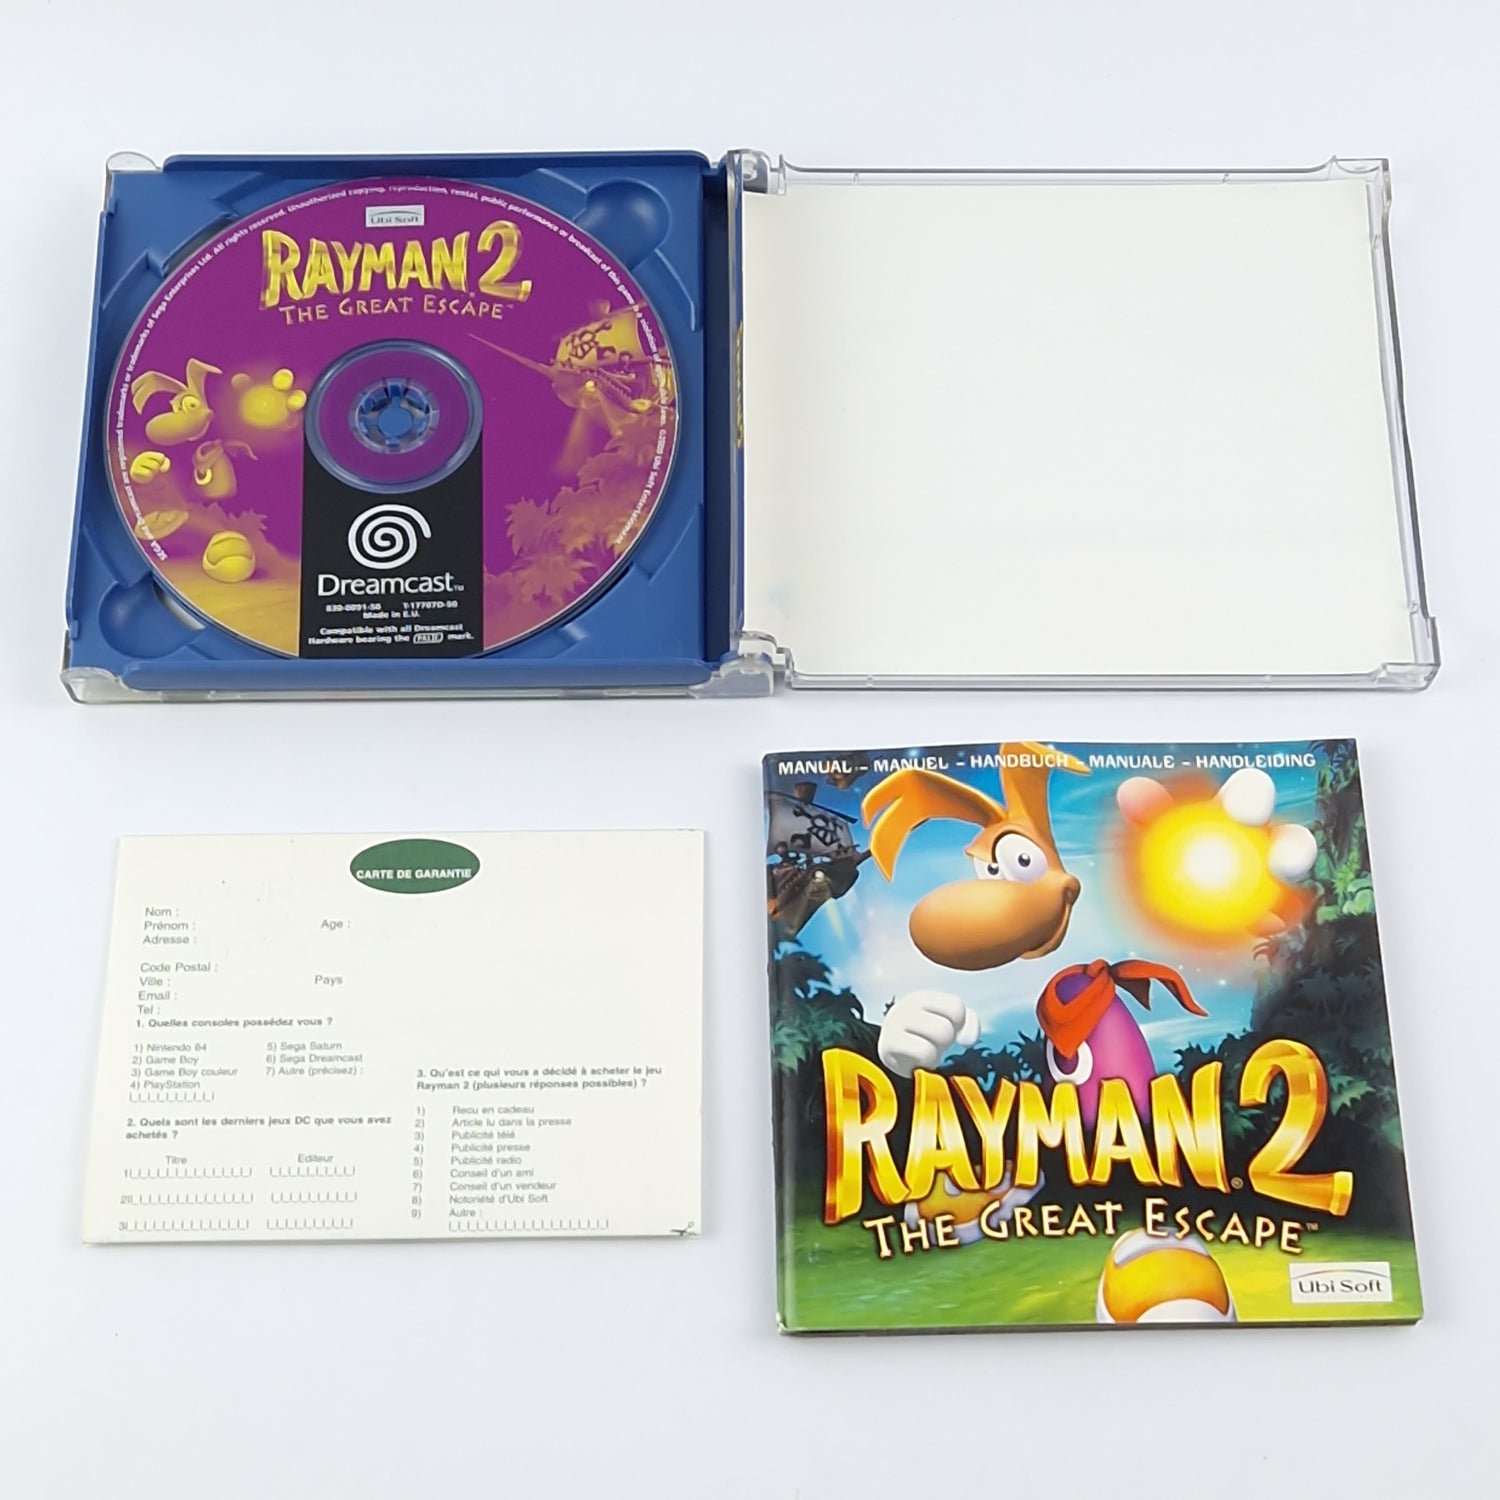 Sega Dreamcast Game: Rayman 2 The Great Escape - OVP Instructions CD PAL DC Game